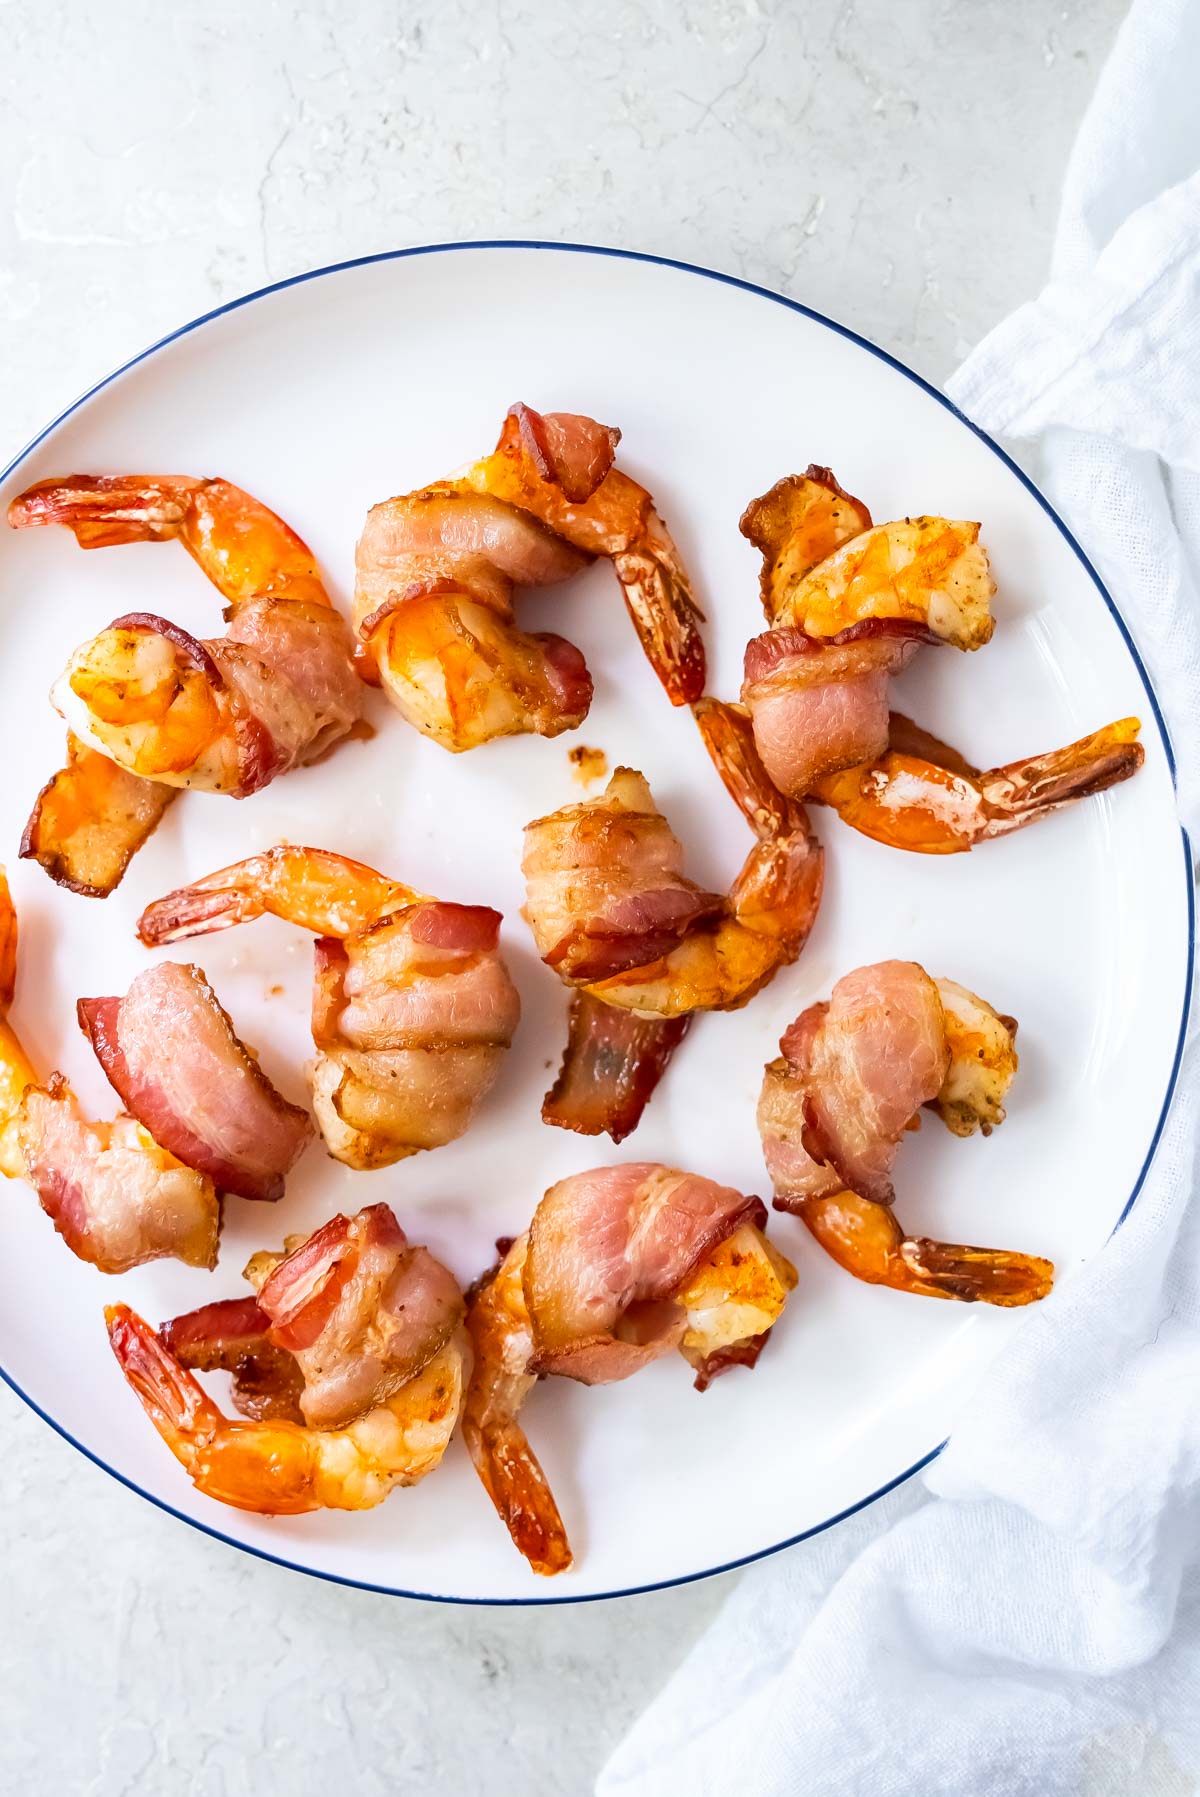 the finished bacon wrapped shrimp air fryer recipe ready to serve